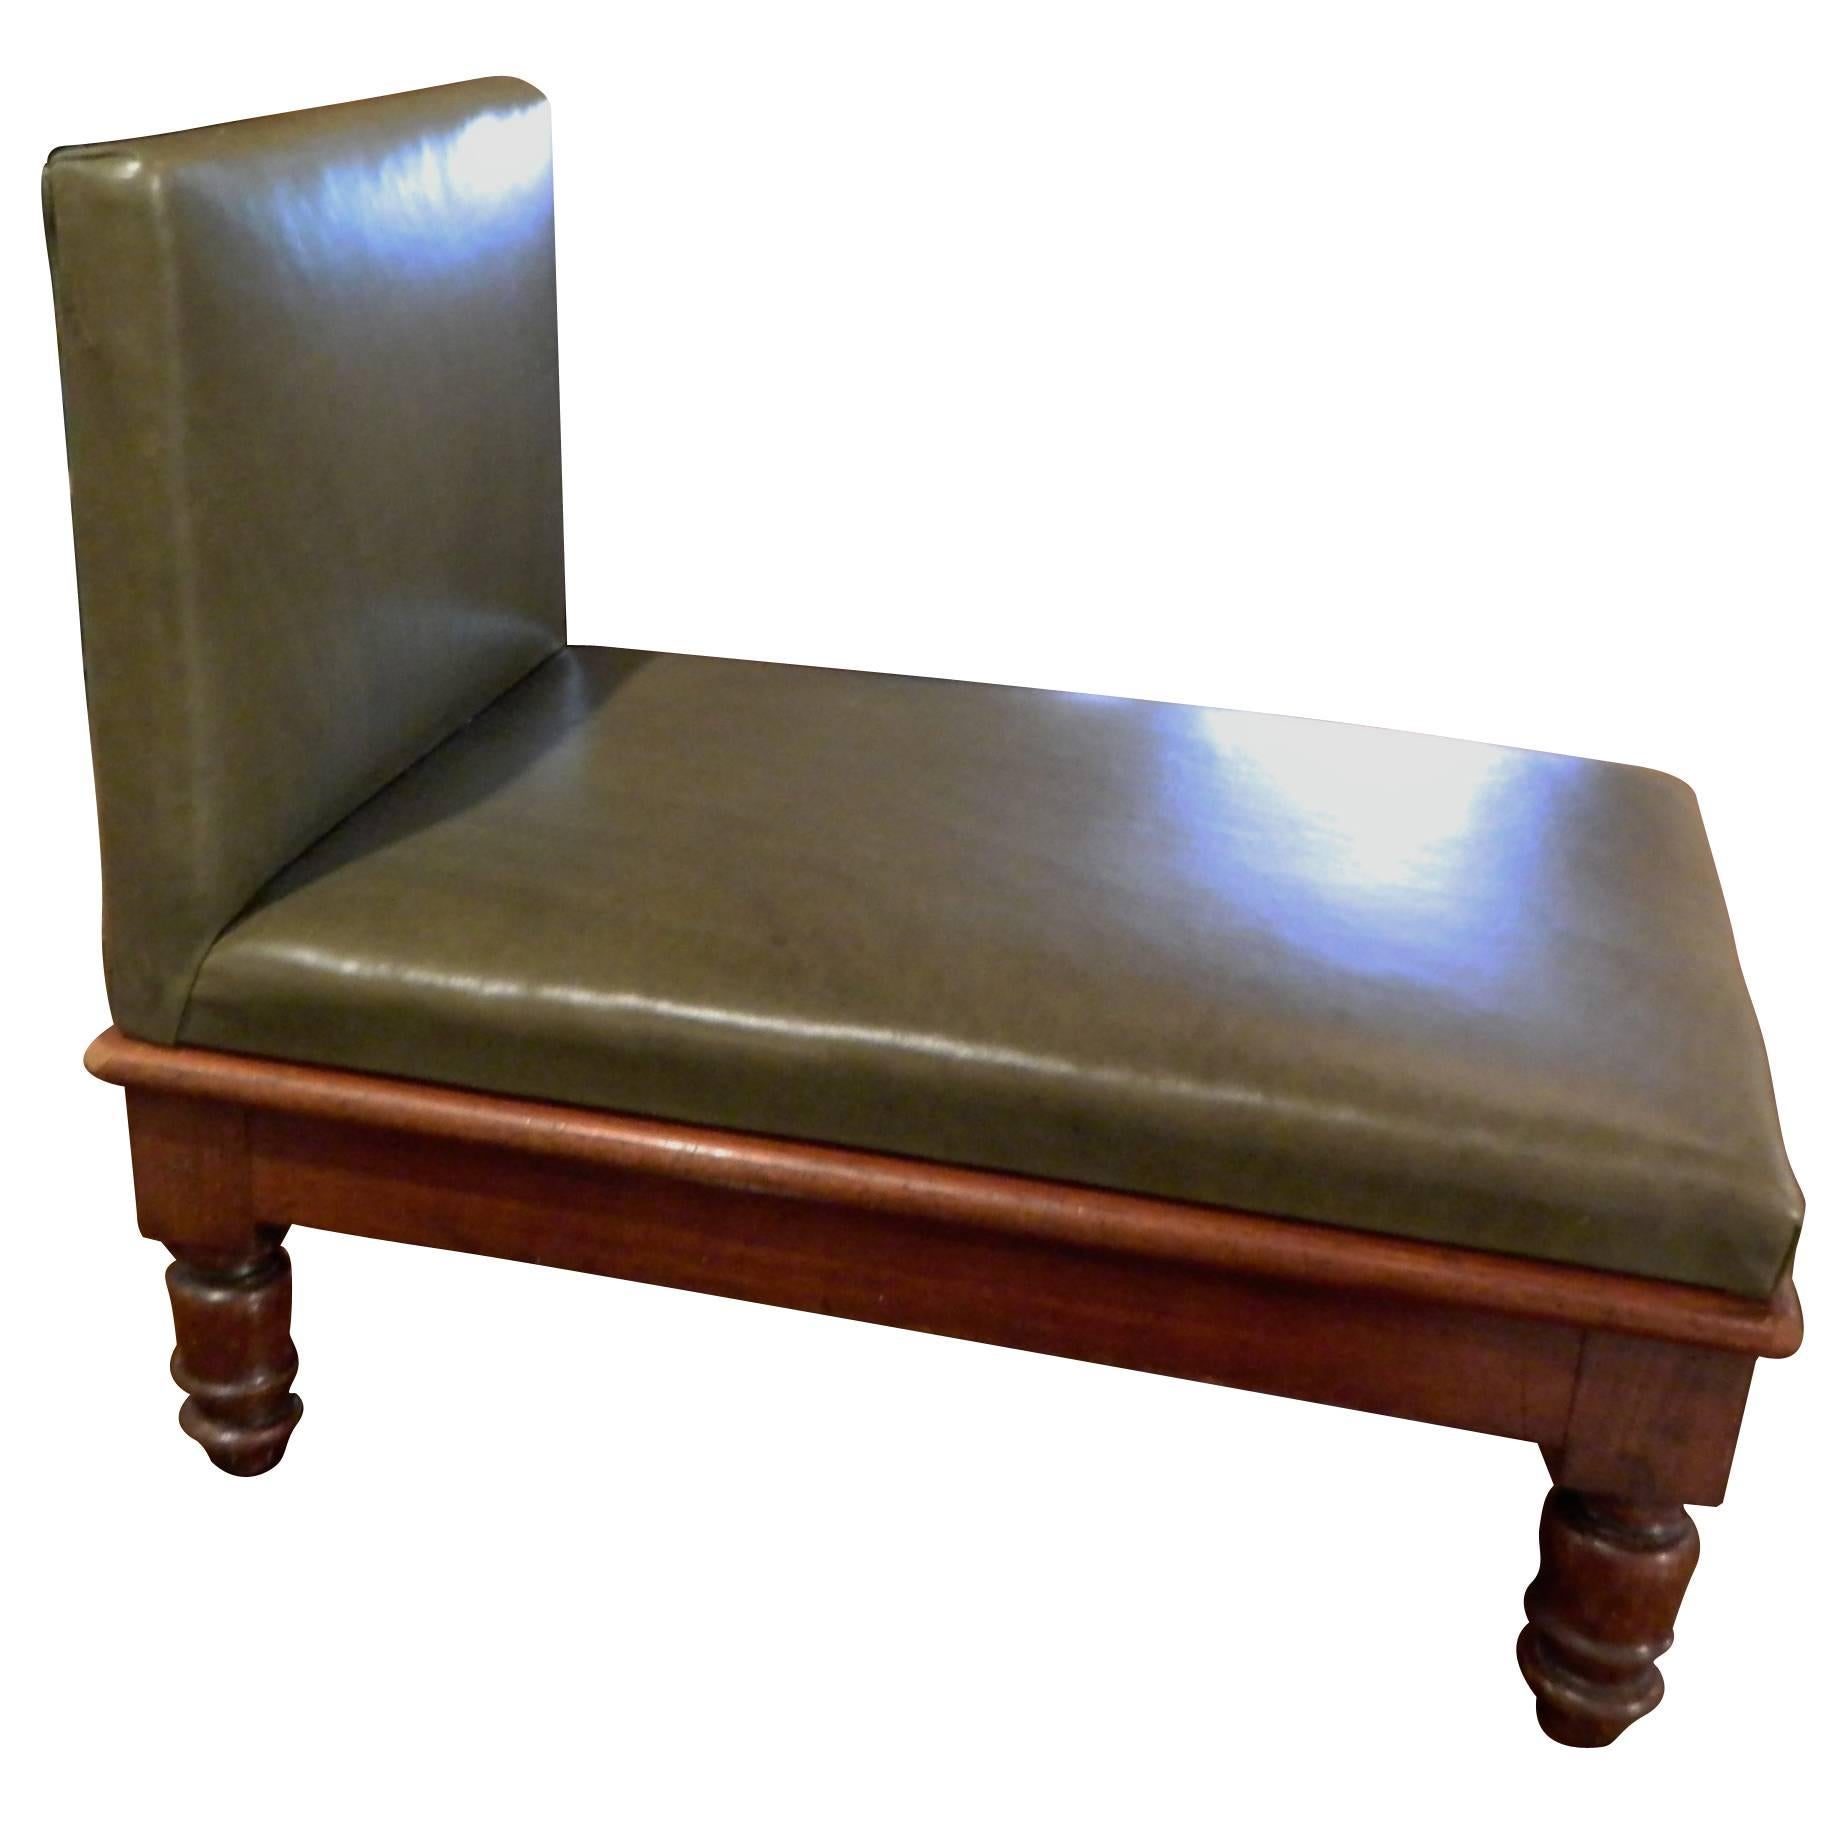 English Metamorphic Mahogany and Leather Upholstered Foot Stool, 19th Century